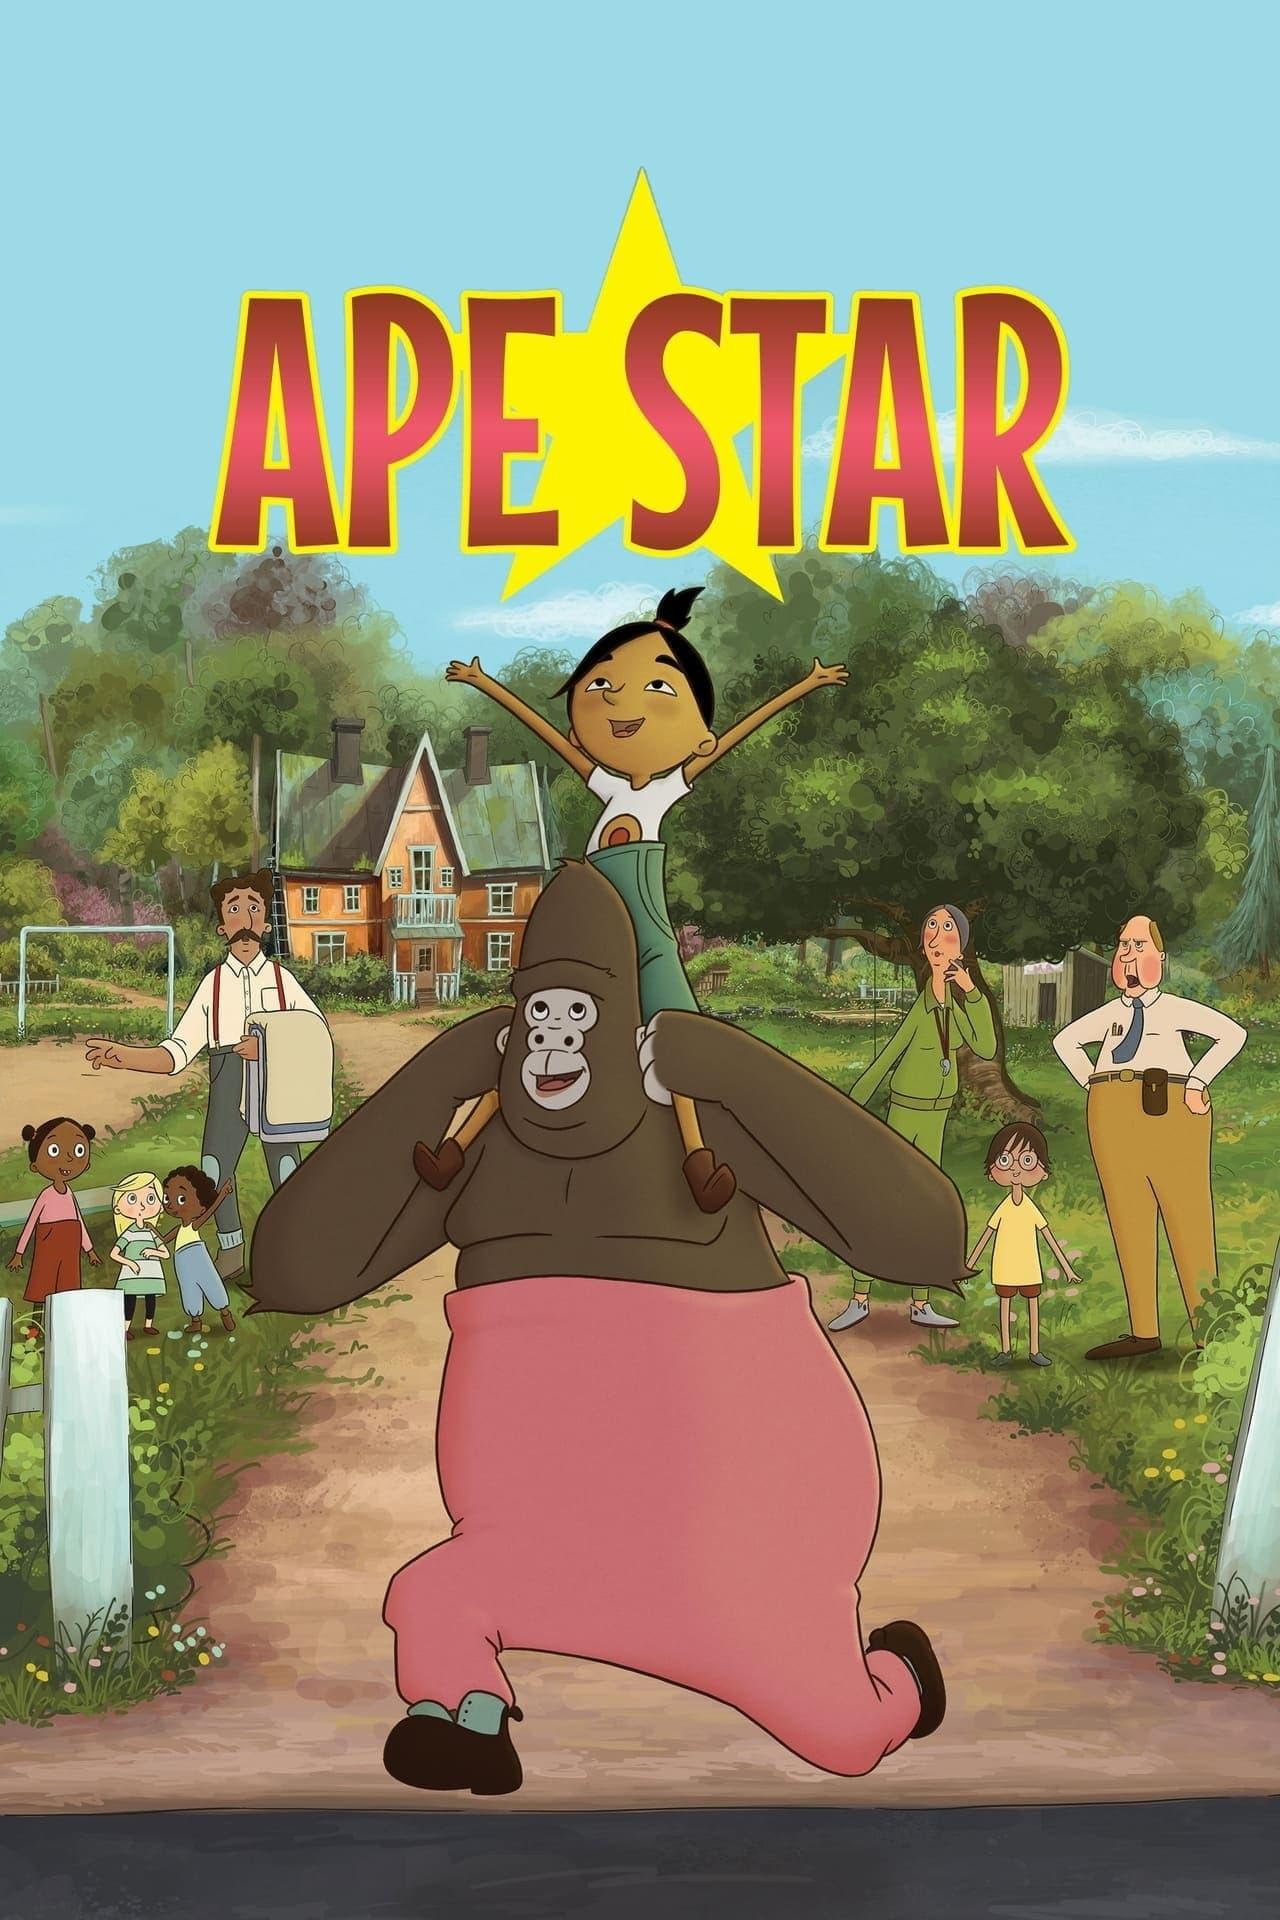 The Ape Star poster